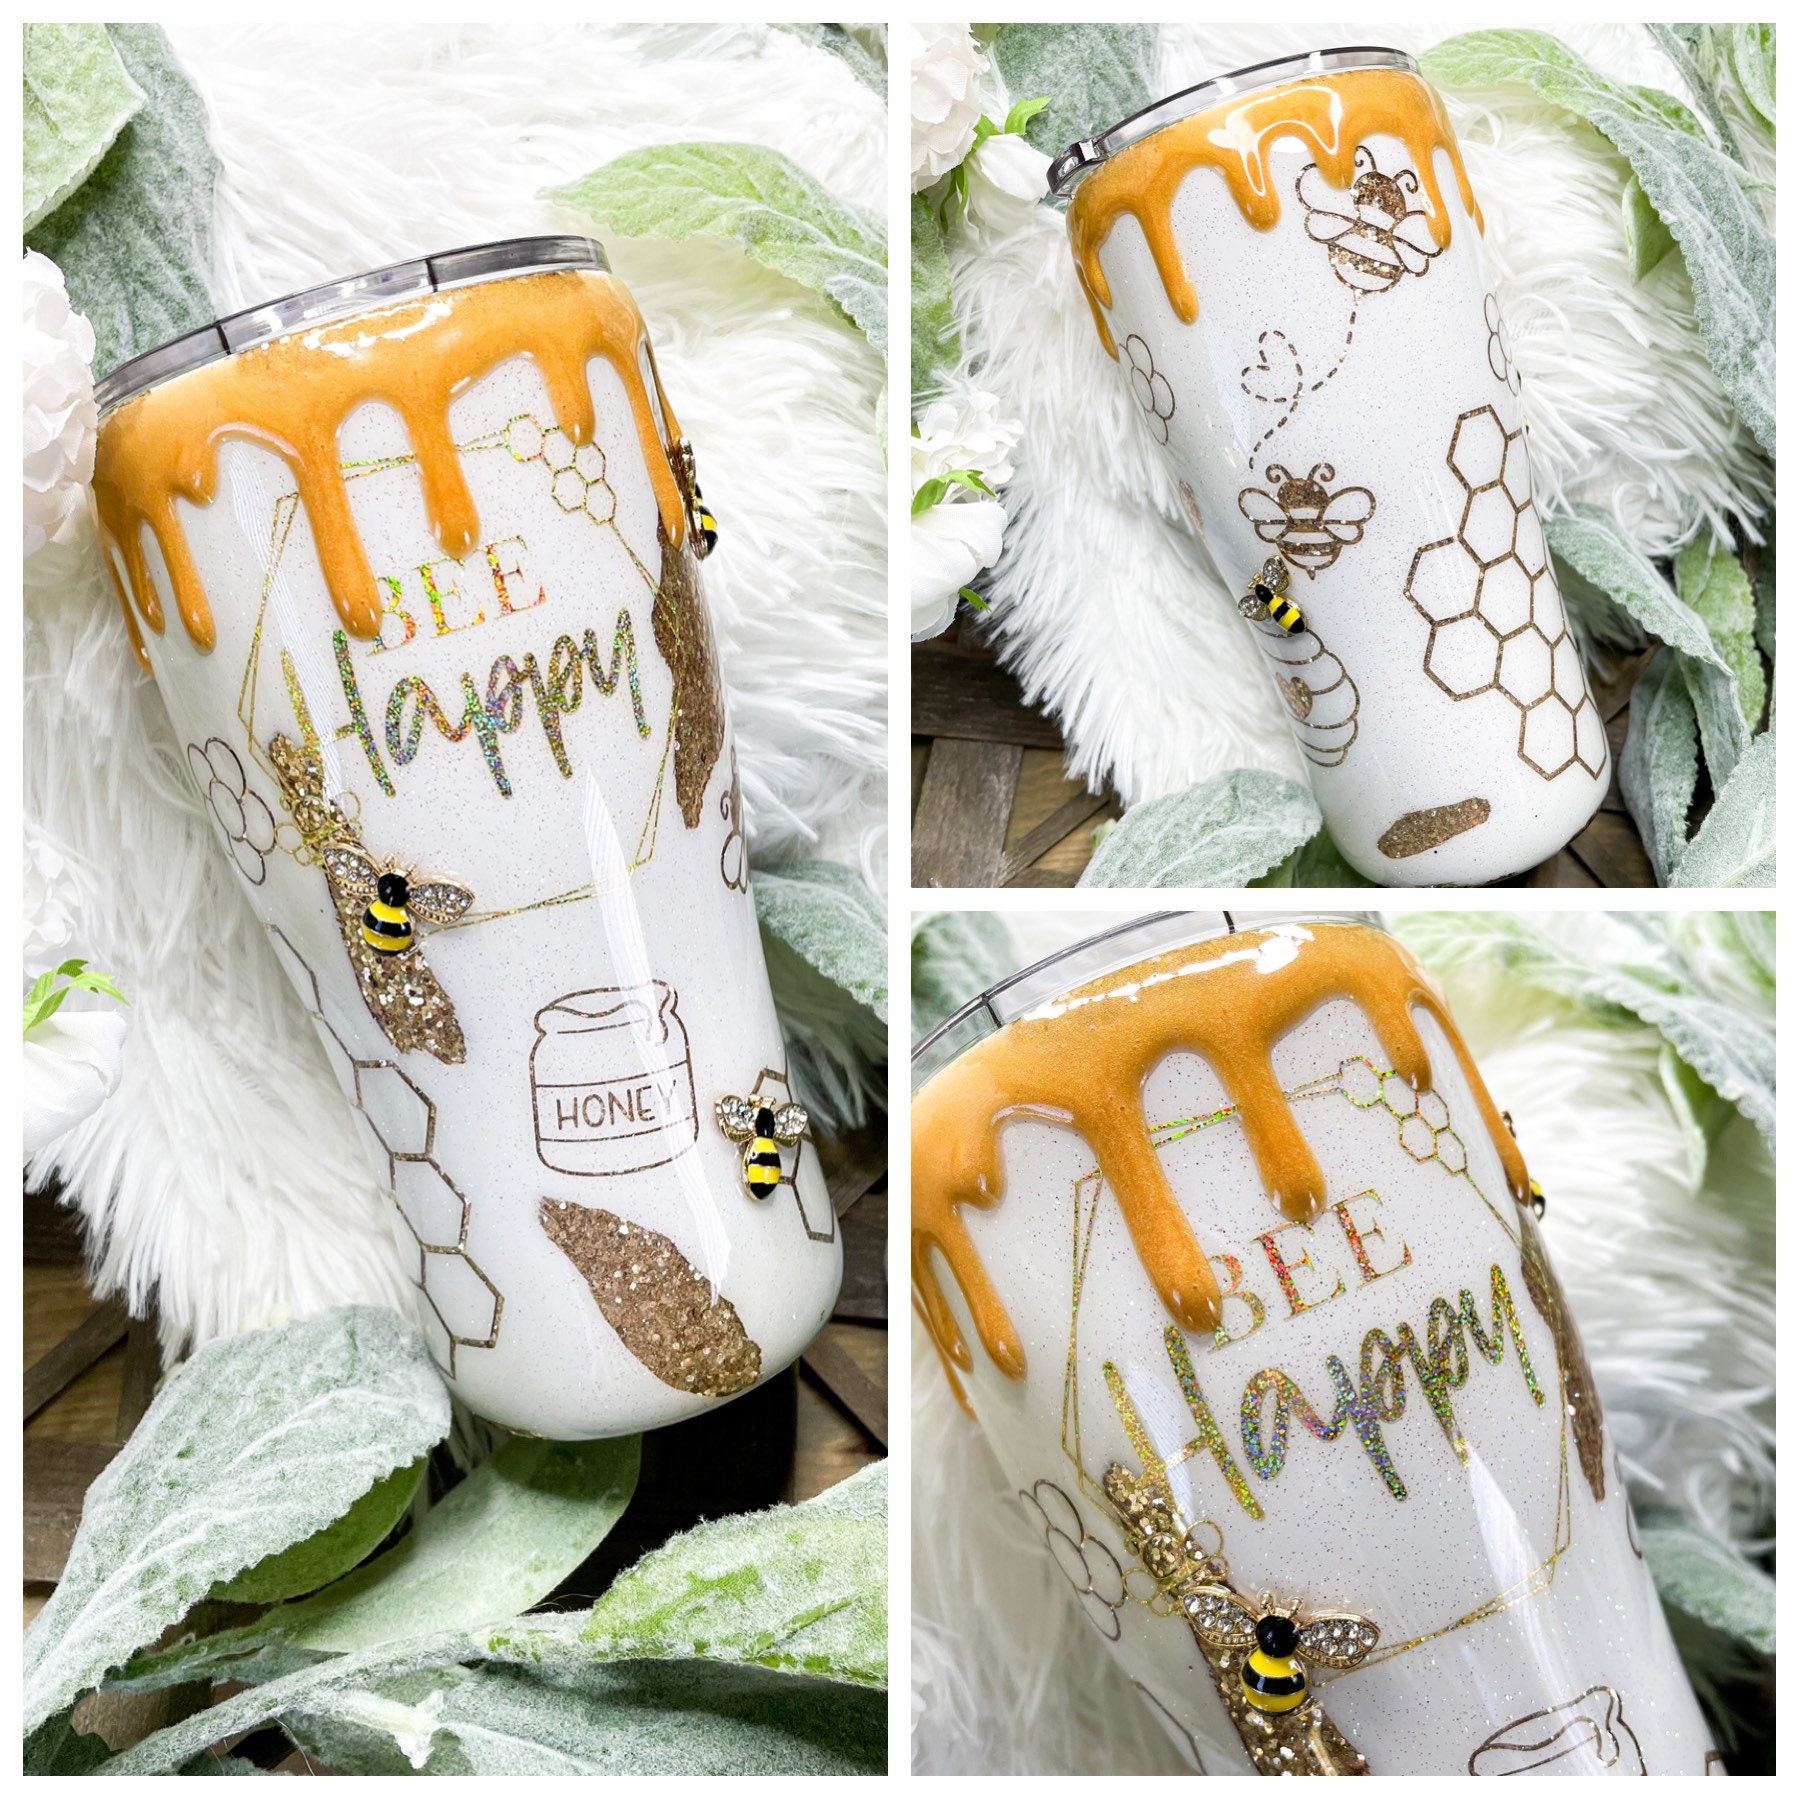 Bee Tumbler, Bee Gifts for Bee Lovers, Personalized Bee Gift for Women &  Girls, Bee Themed Birthday 